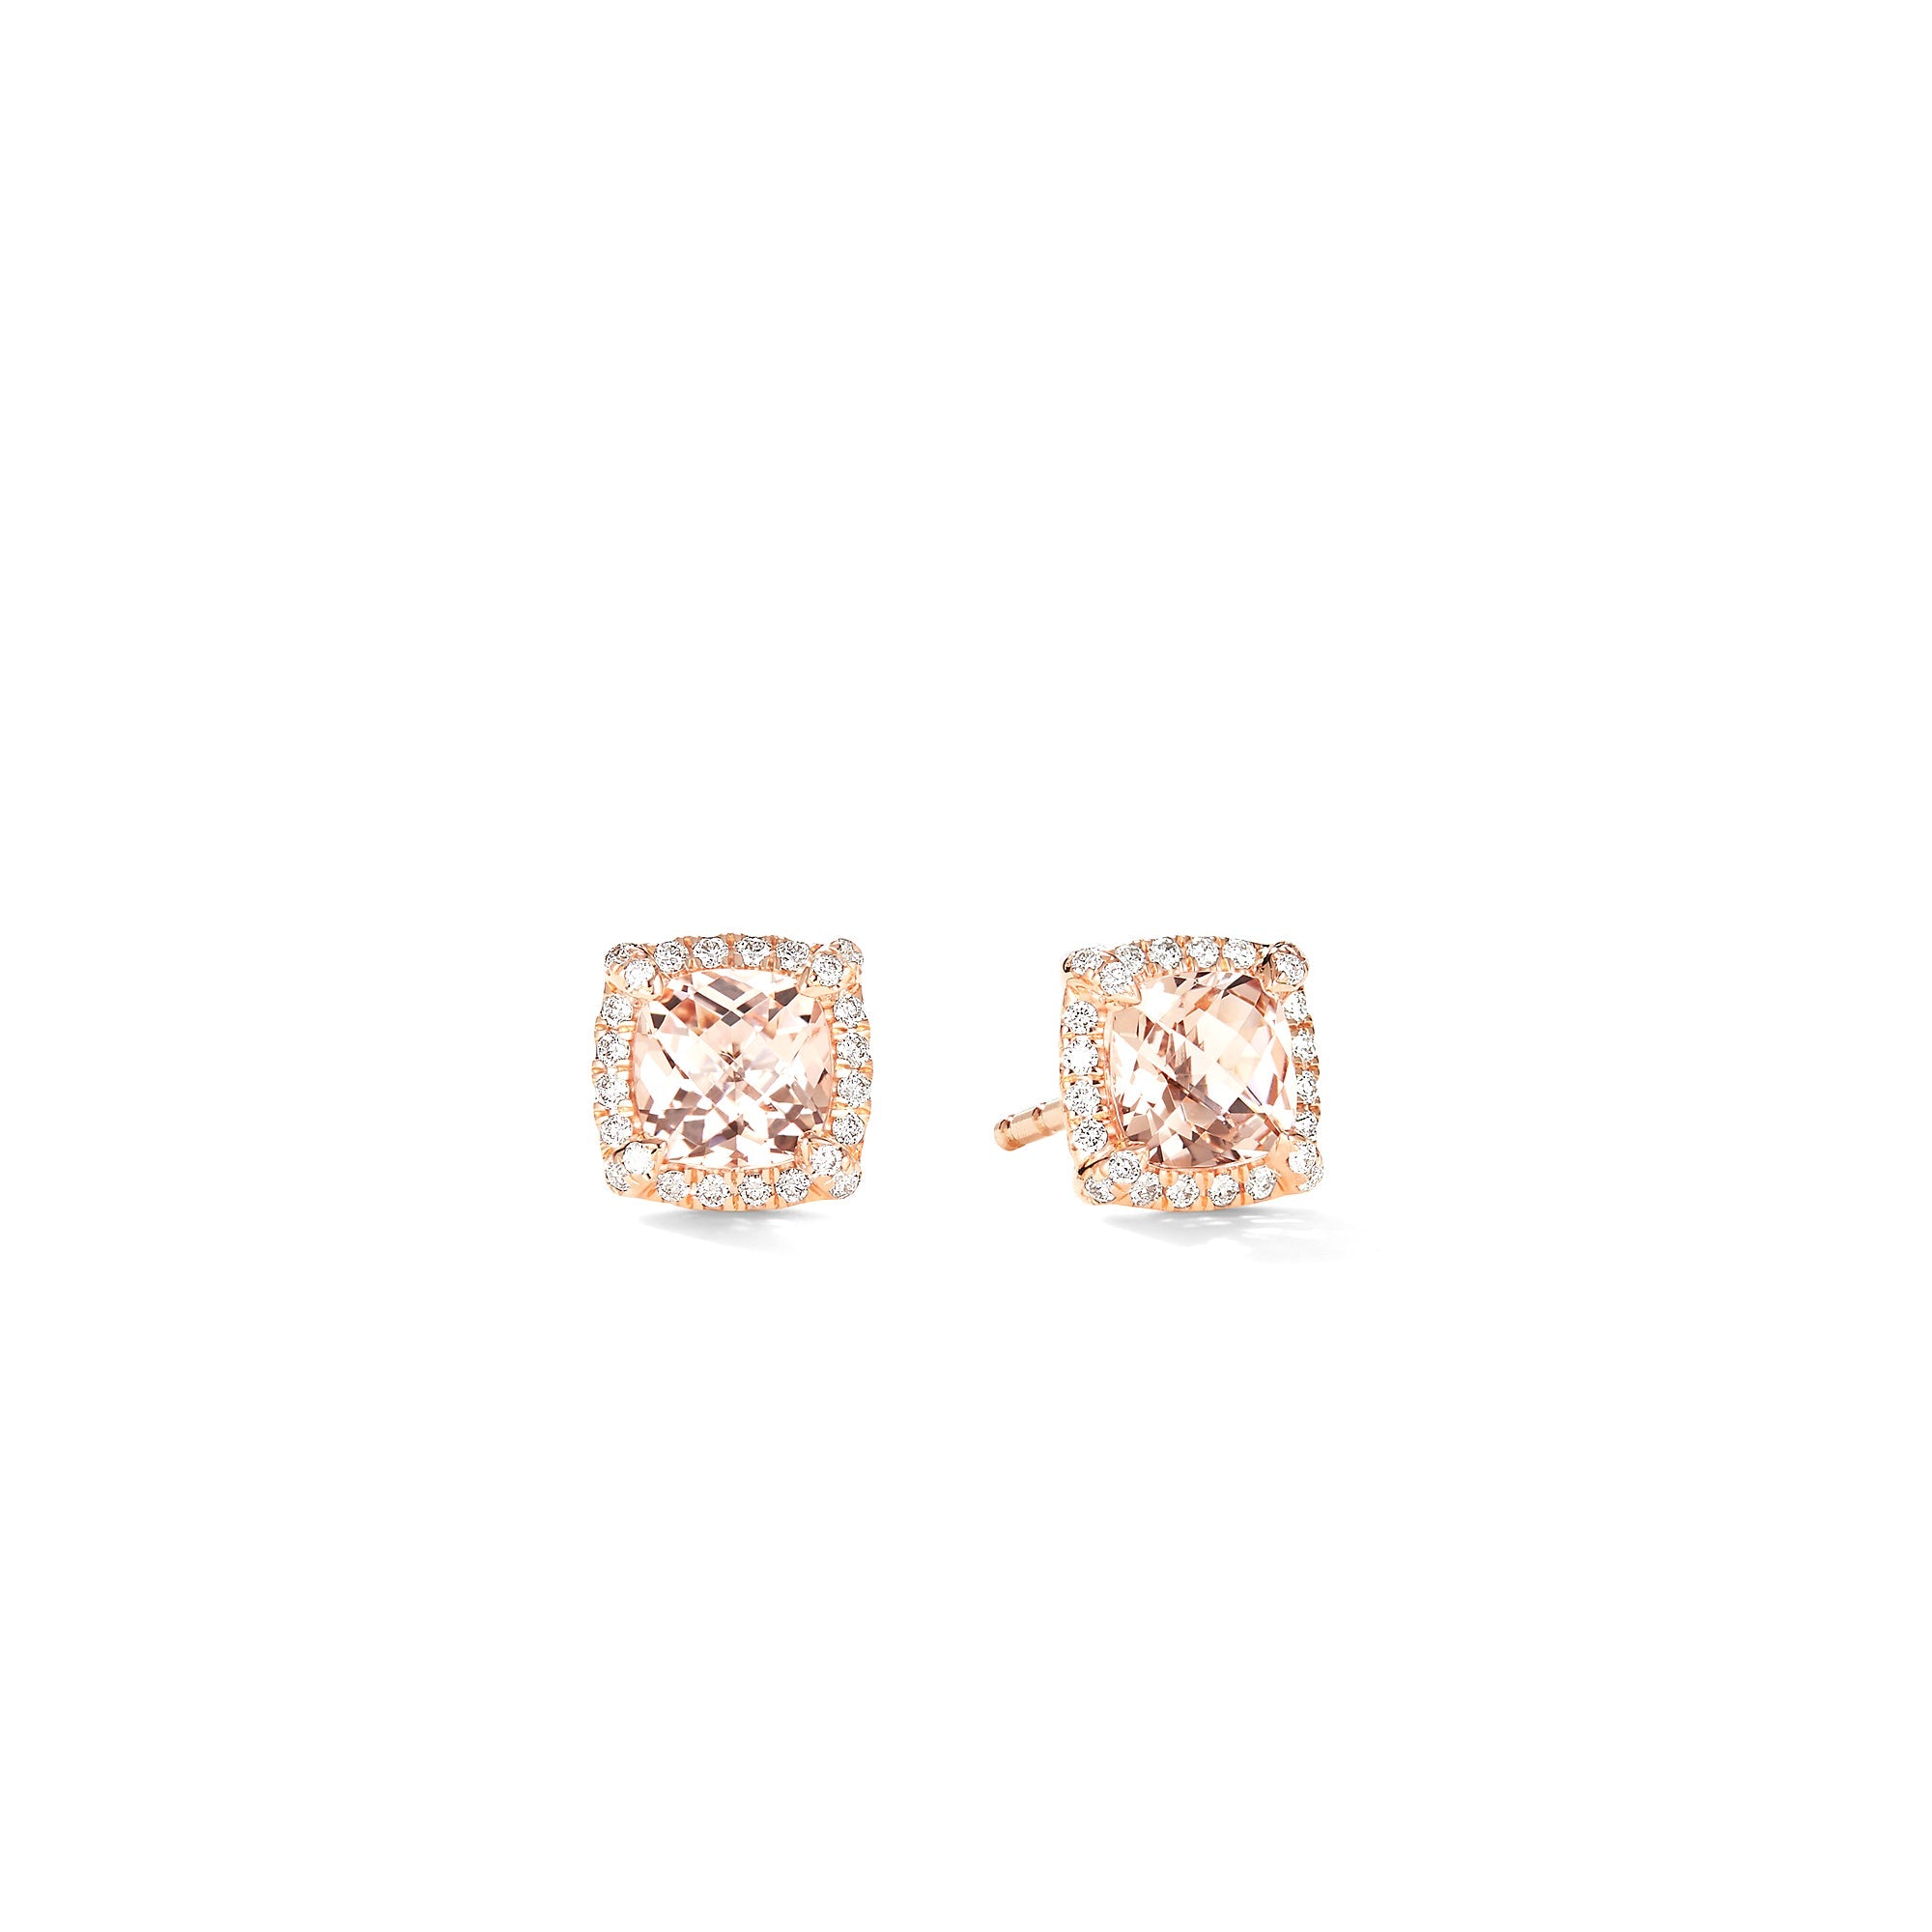 Petite Chatelaine® Pavé Bezel Stud Earrings in 18ct Rose Gold with Morganite and Diamonds